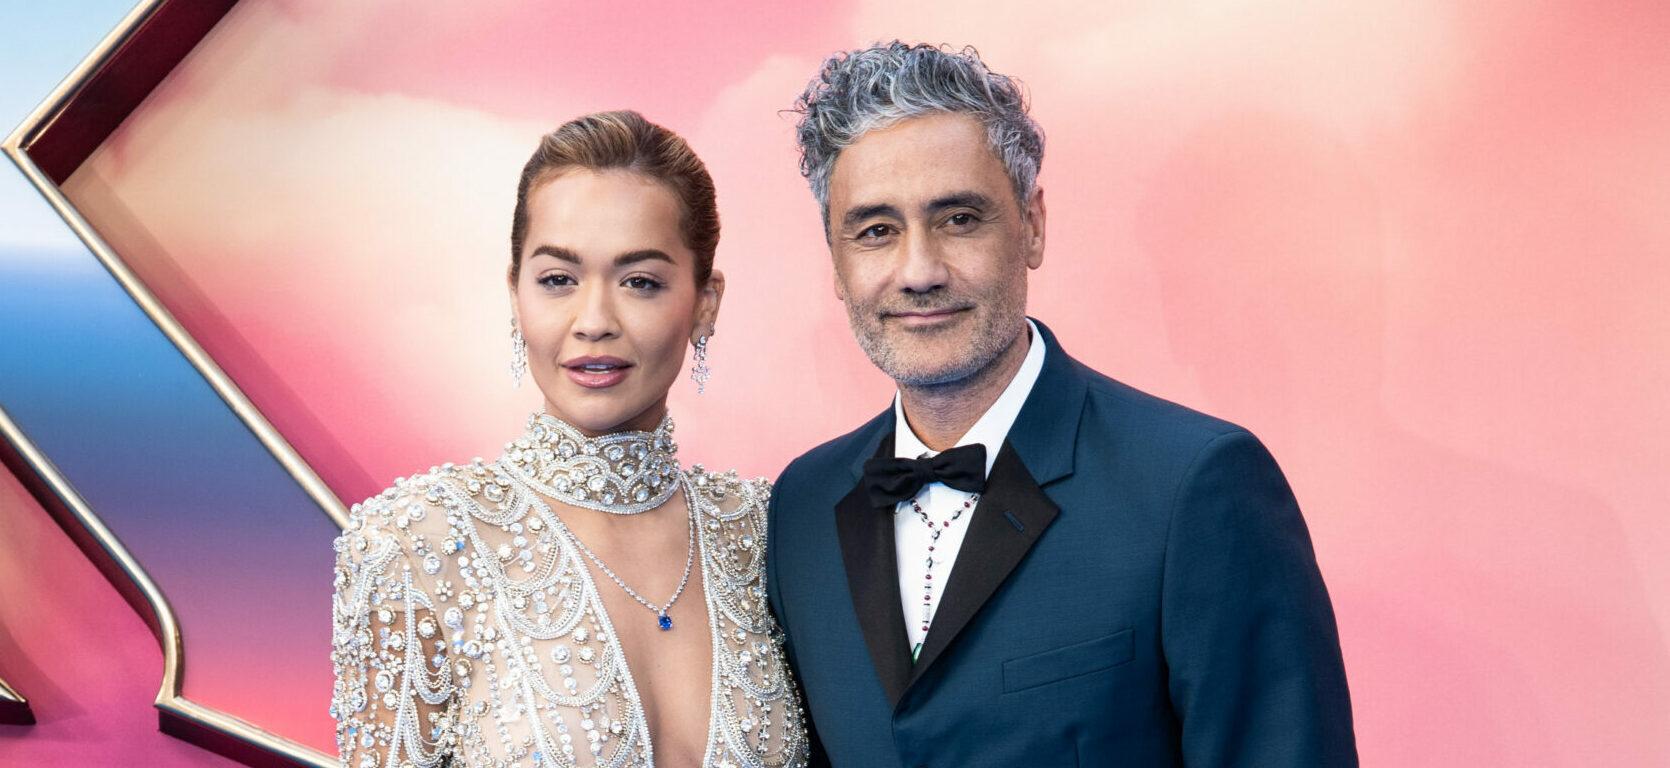 The Moment Taika Waititi & Rita Ora Became More Than Pals Involved A ‘Low Back’ Stroke